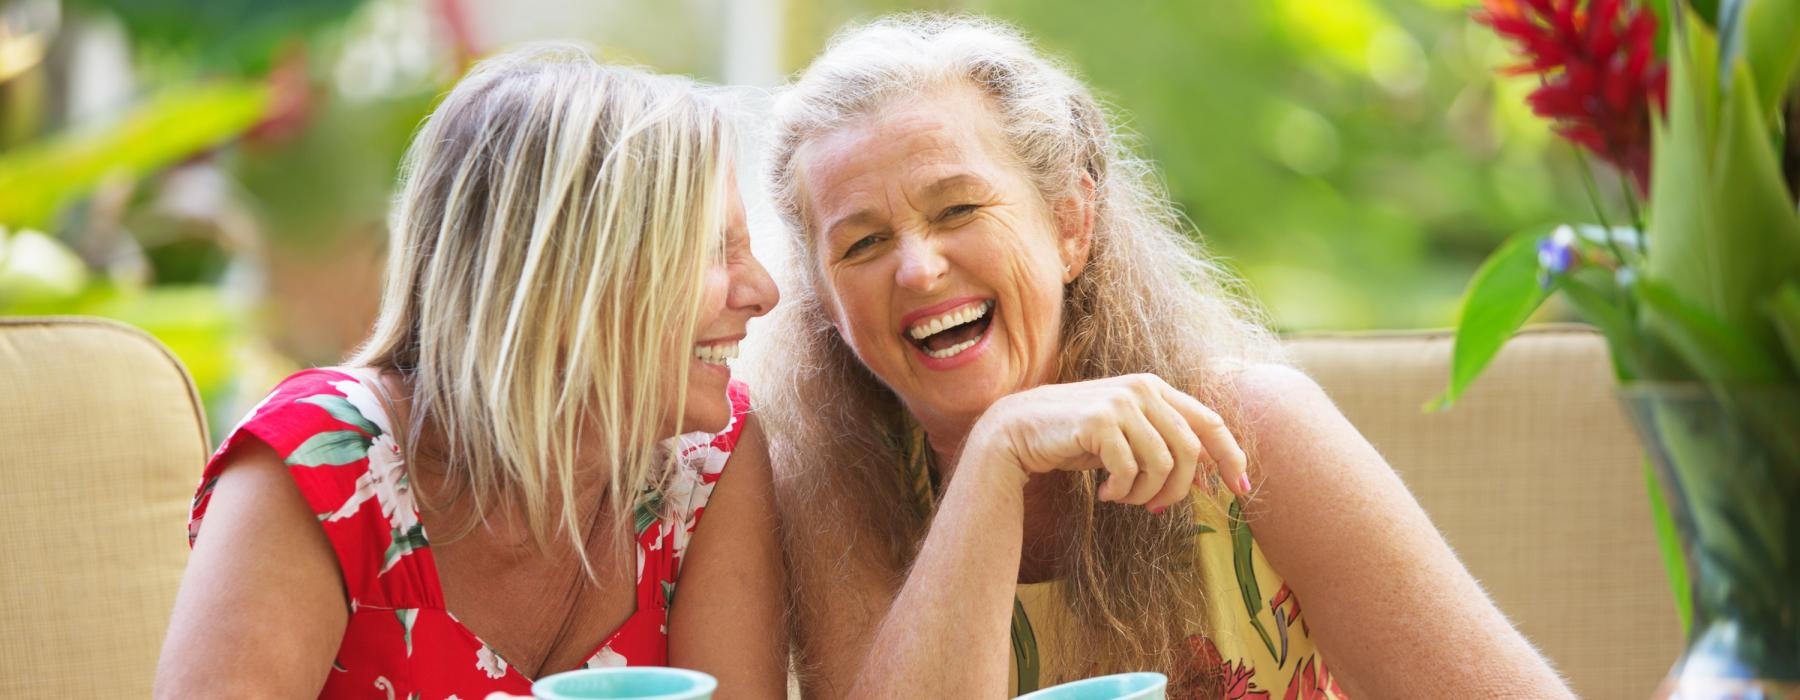 two woman laughing